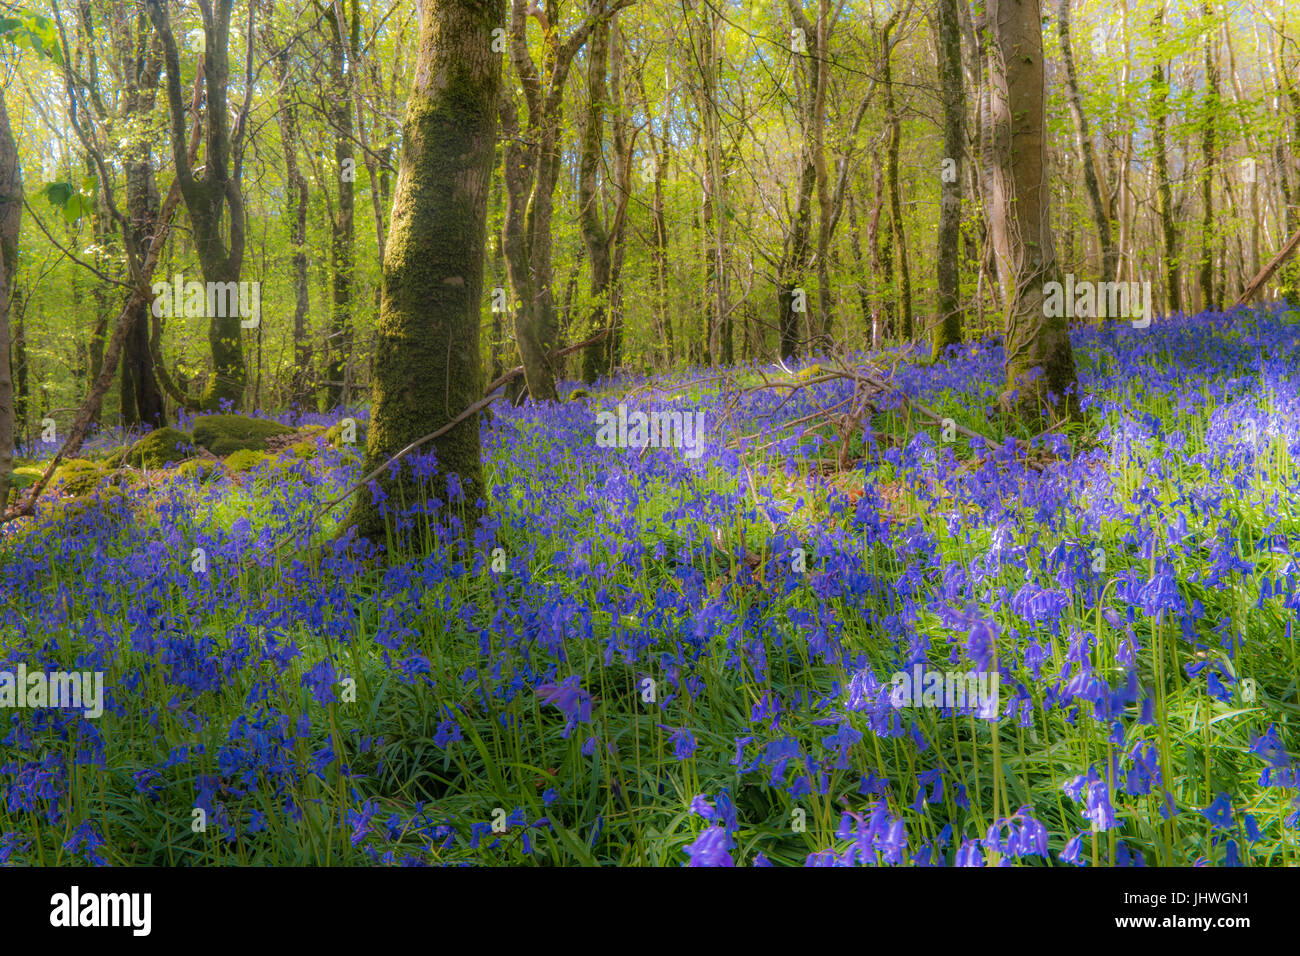 Bluebell blanket in wood in spring Stock Photo